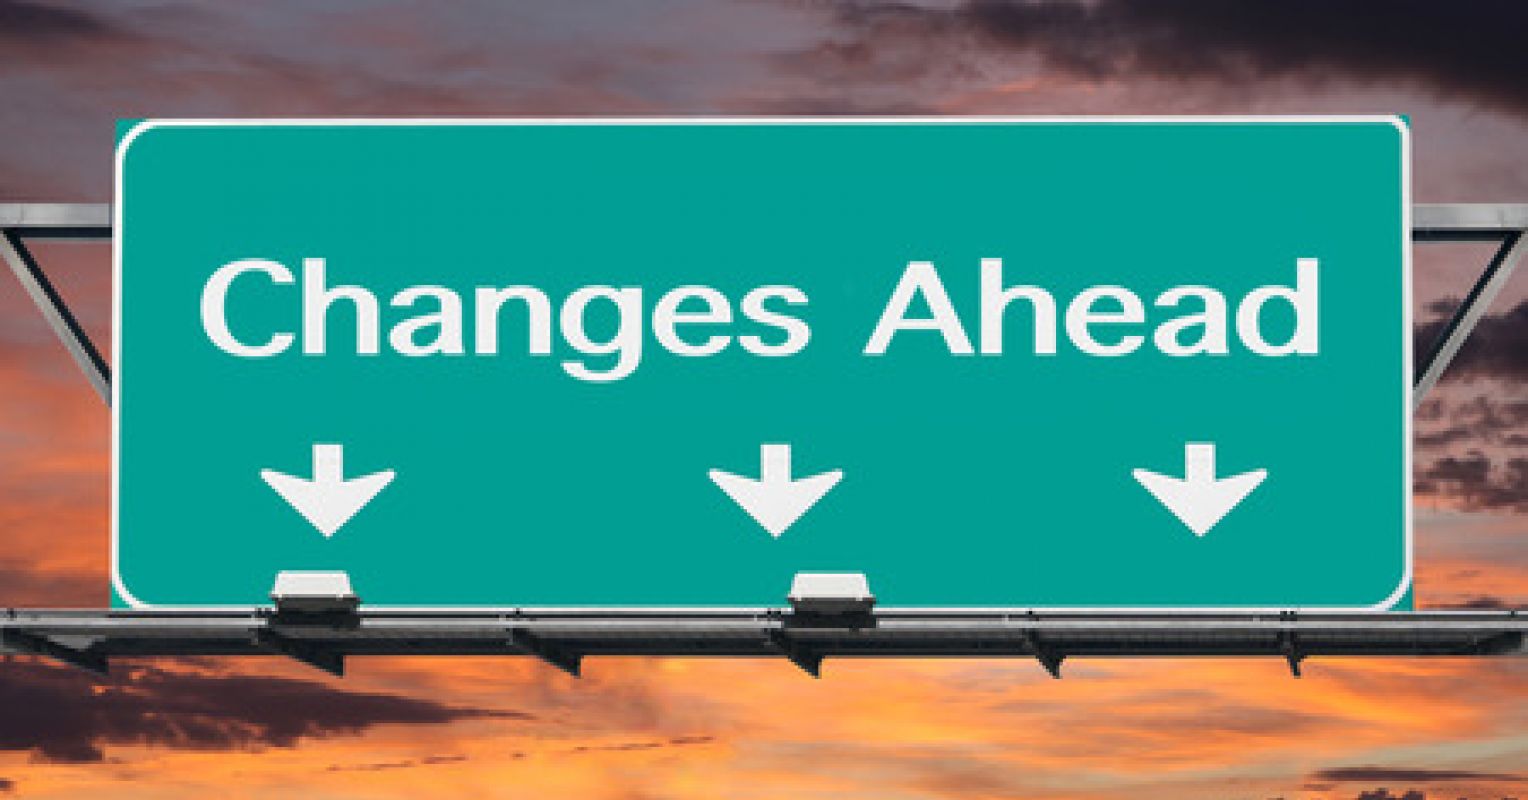 10 Ways to Cope With Big Changes | Psychology Today